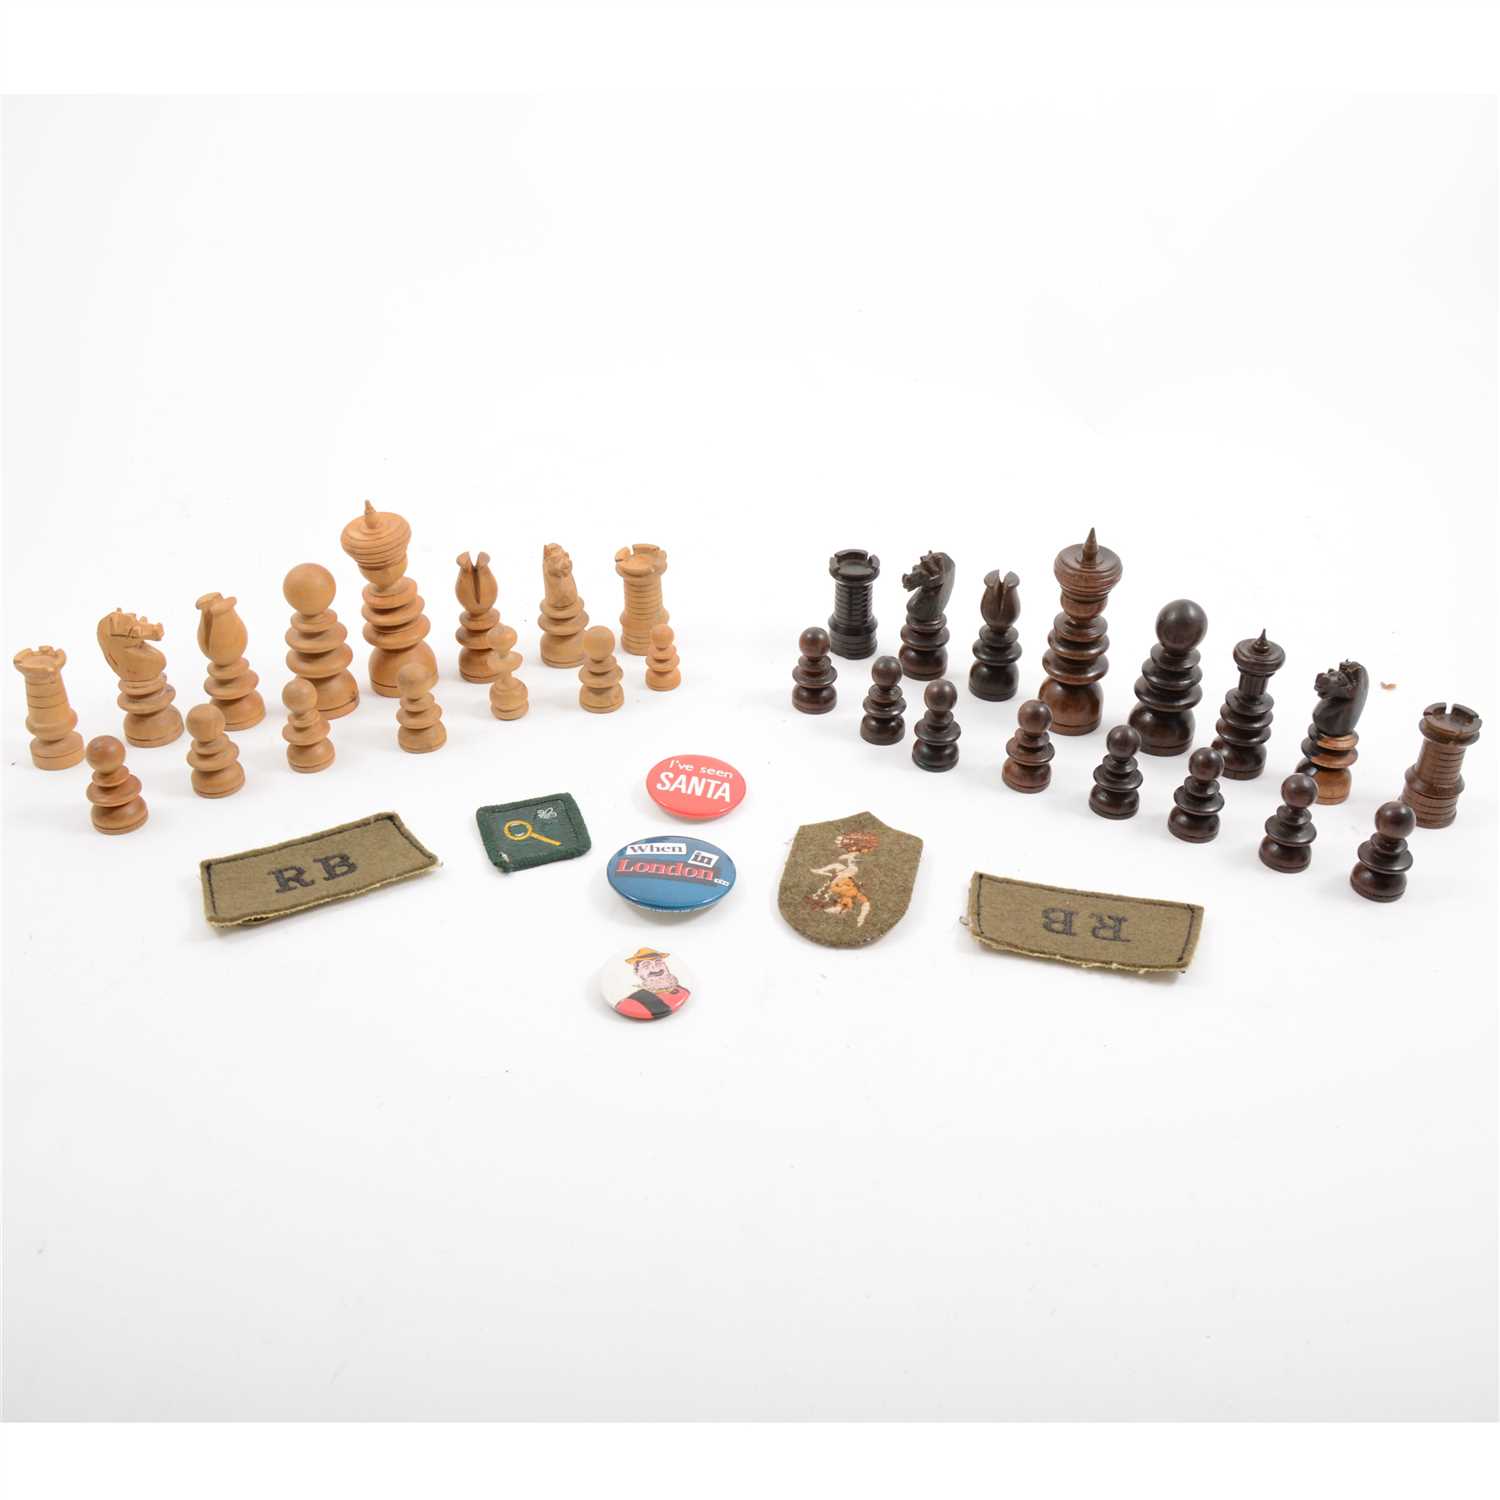 Lot 107 - Collection of vintage badges and pin badges, military buttons, postcards and part chess set.